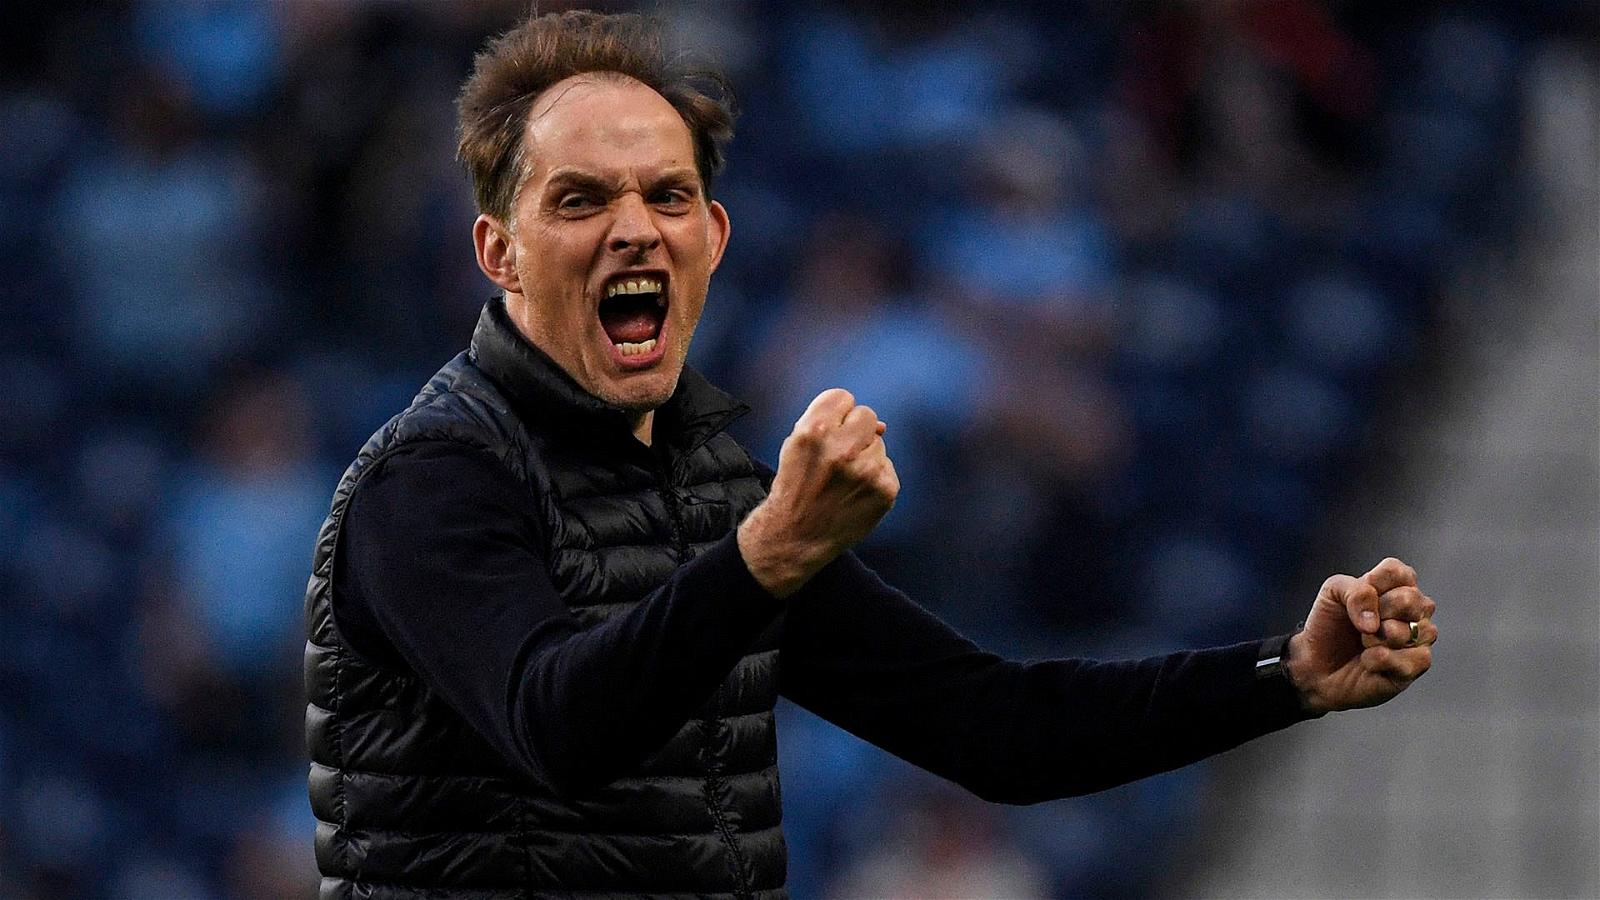 Breaking: Bayern Munich appoint Tuchel as new manager